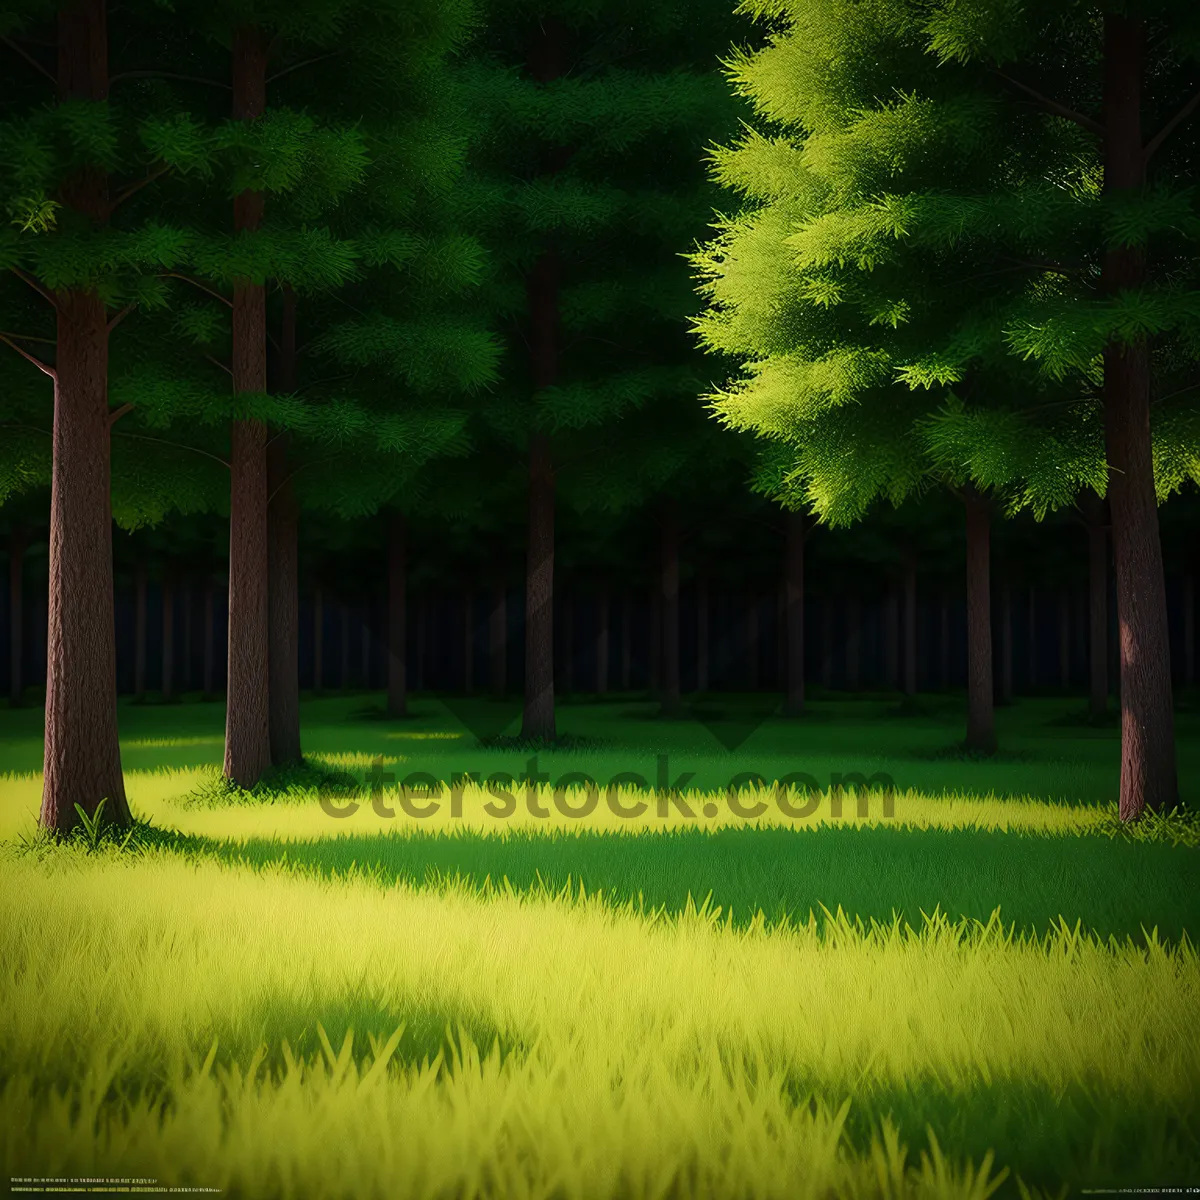 Picture of Serene Countryside with Lush Trees and Grass